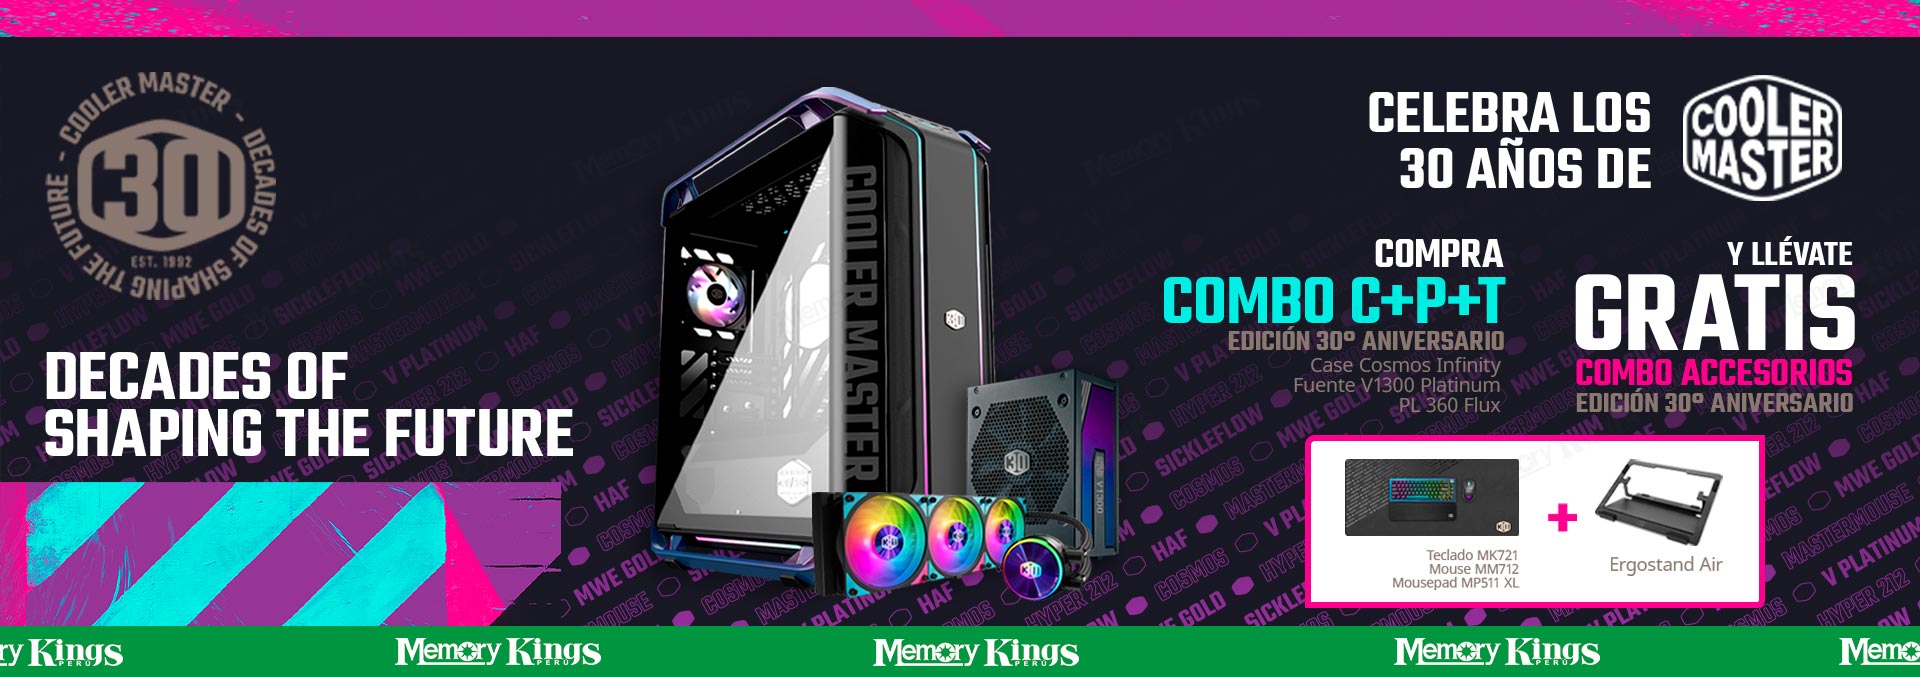 034112 - COOLER MASTER COSMOS INFINITY 30TH ANNIVERSA C+P+T